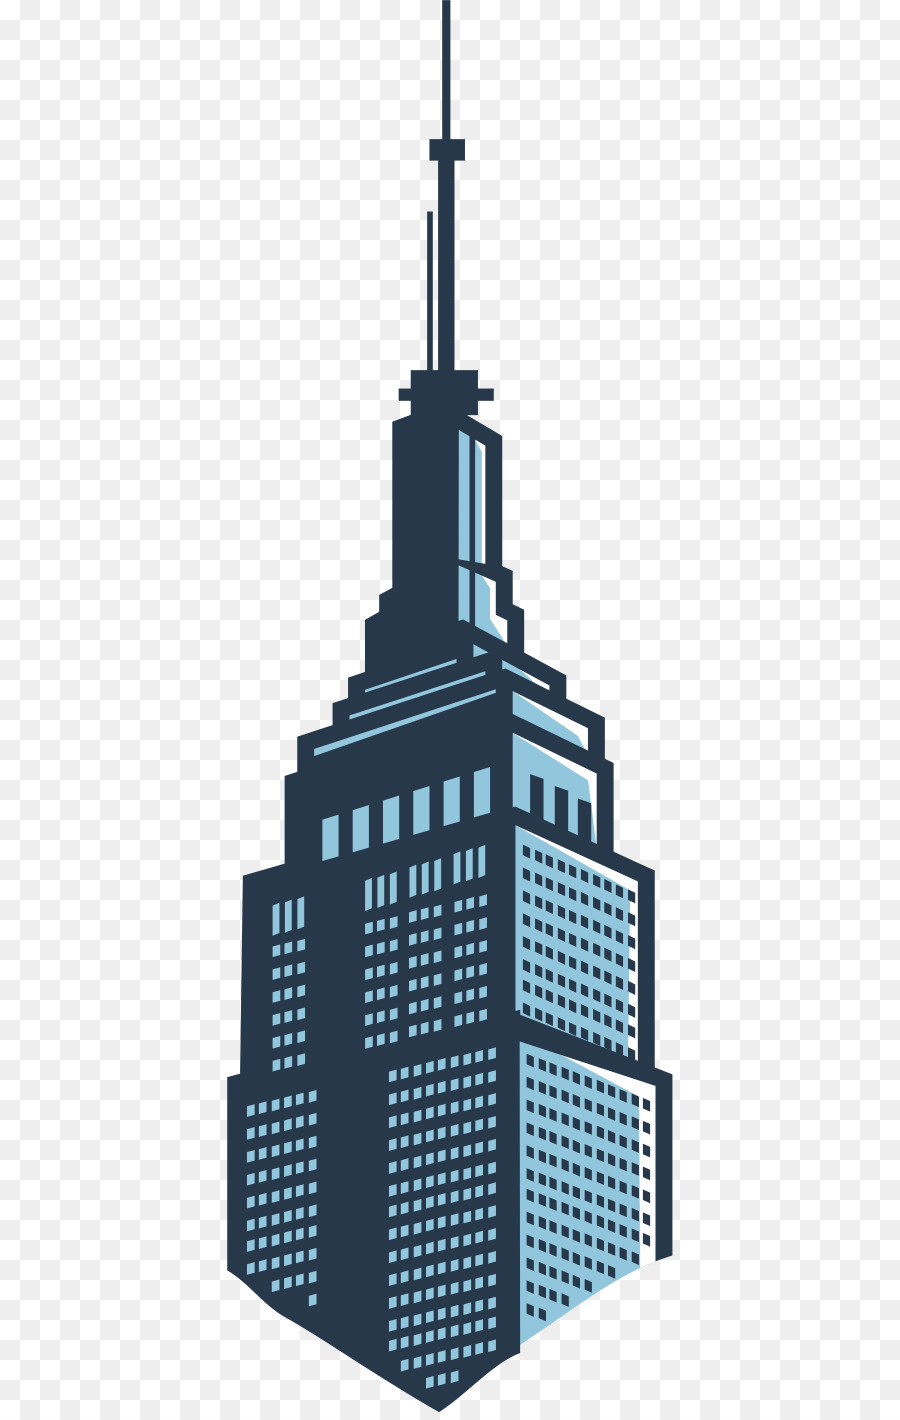 Empire State Building Chrysler Building Empire steel works Inc. - Empire State Building png download - 446*1413 - Free Transparent Empire State Building png Download.